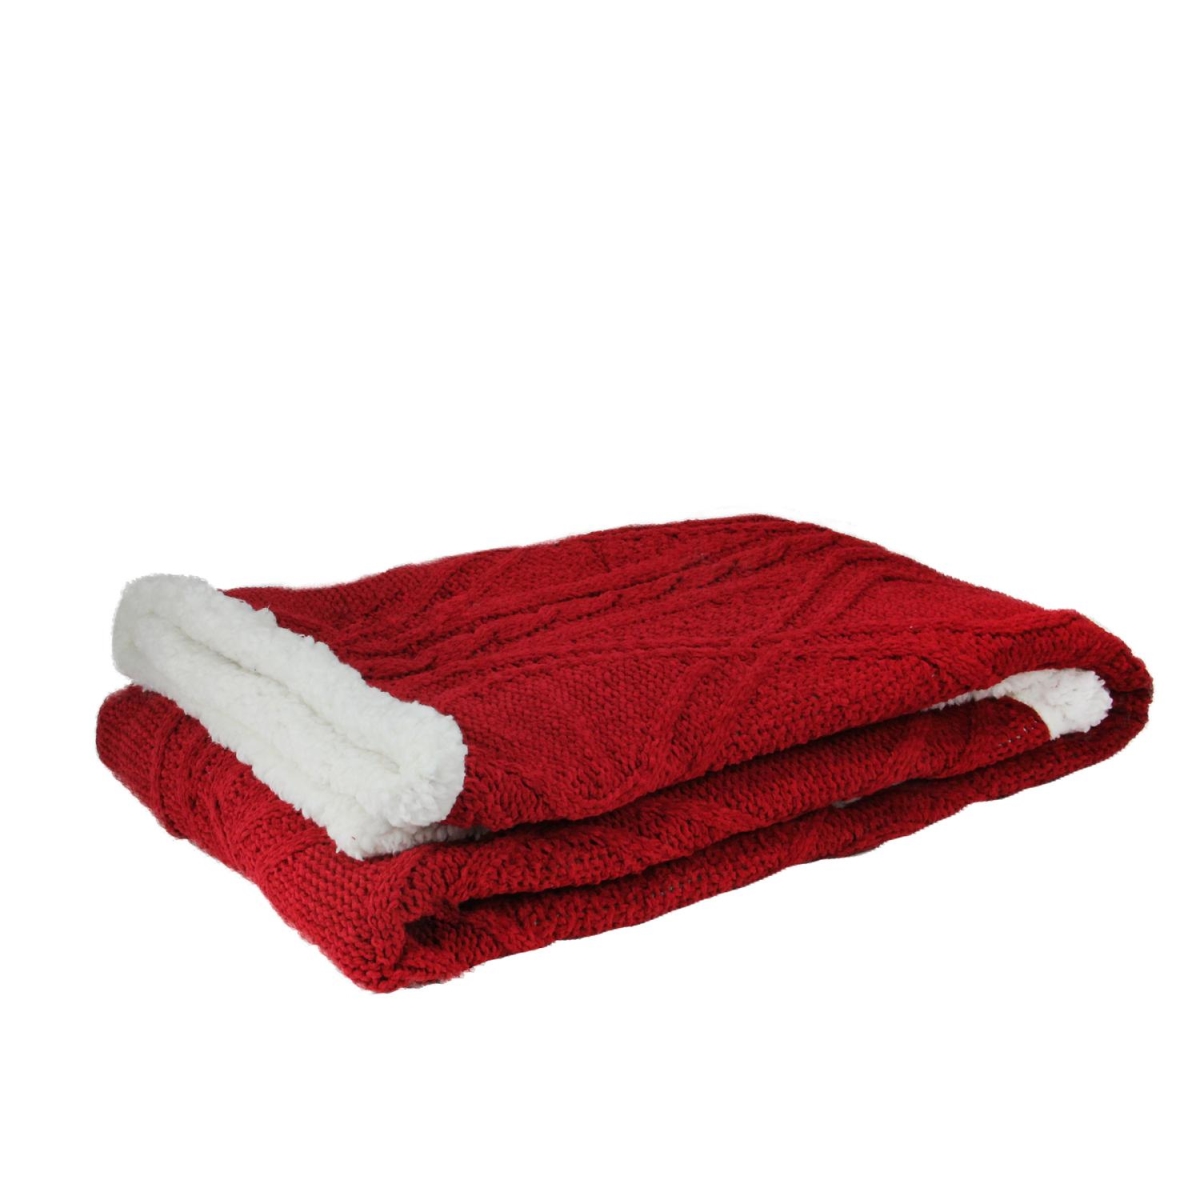 32667180 50 X 60 In. Red Cable Knit Plush Sherpa Throw Blanket